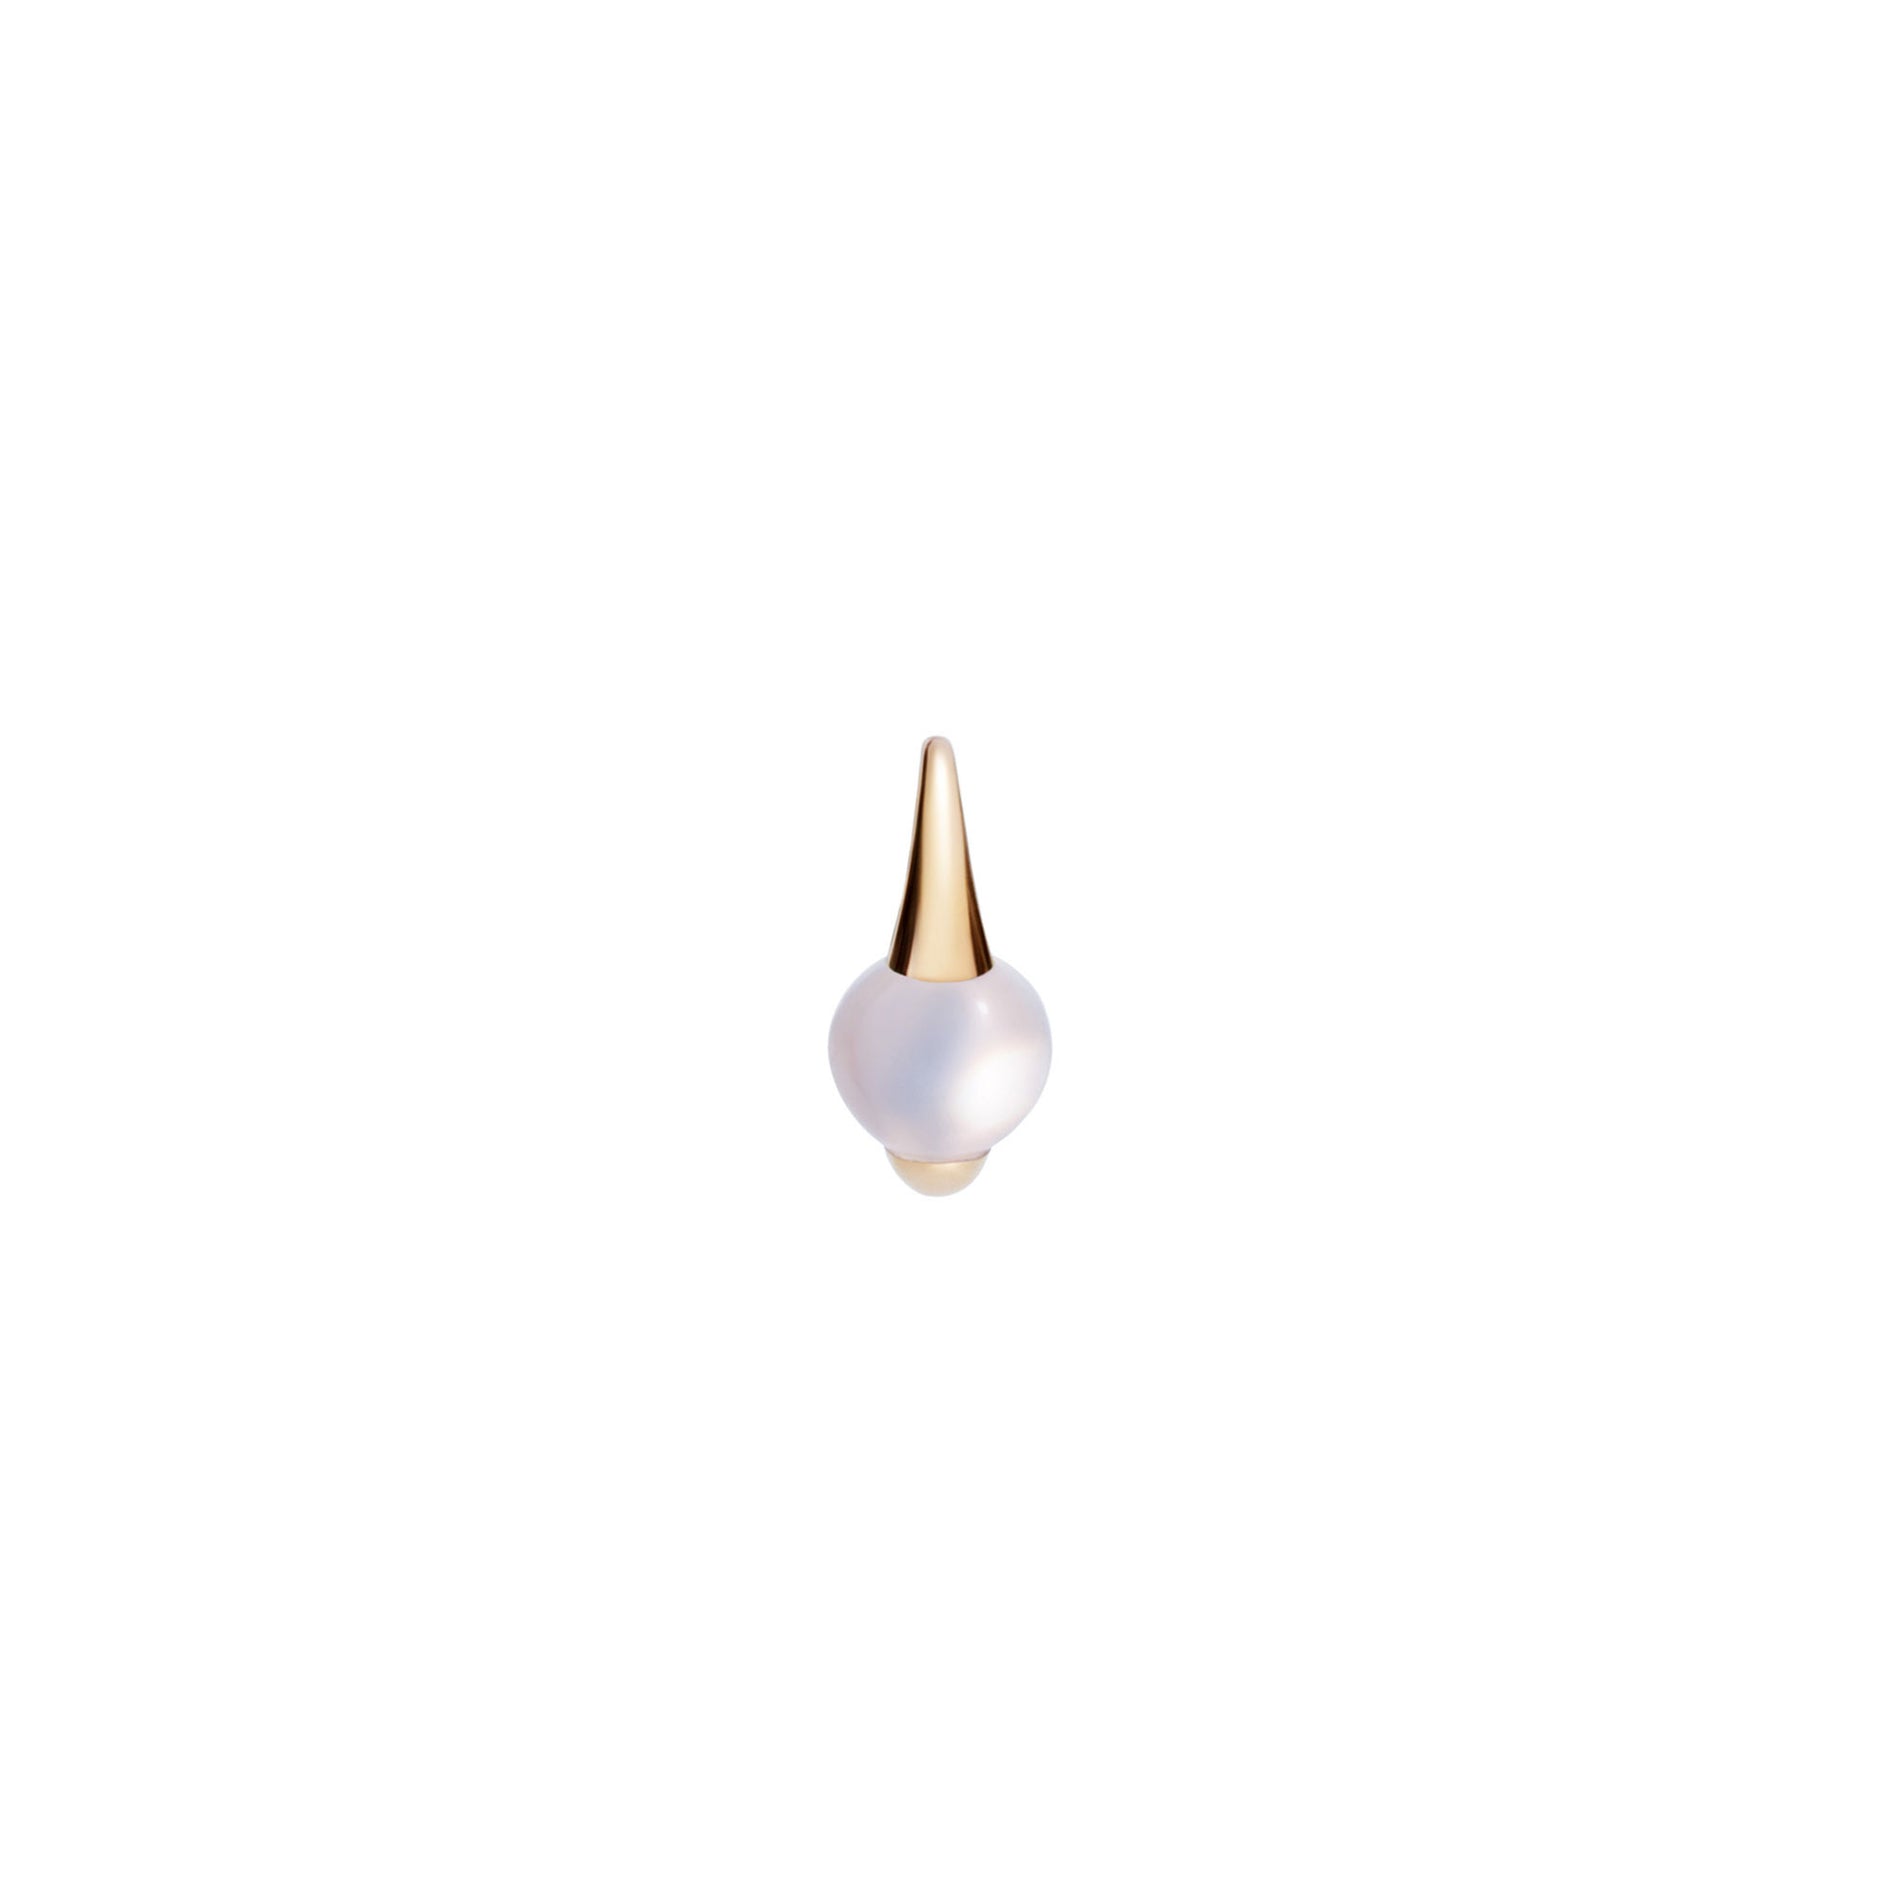 M'ama non M'ama Earrings in 18k Rose Gold with Moonstone - Orsini Jewellers NZ